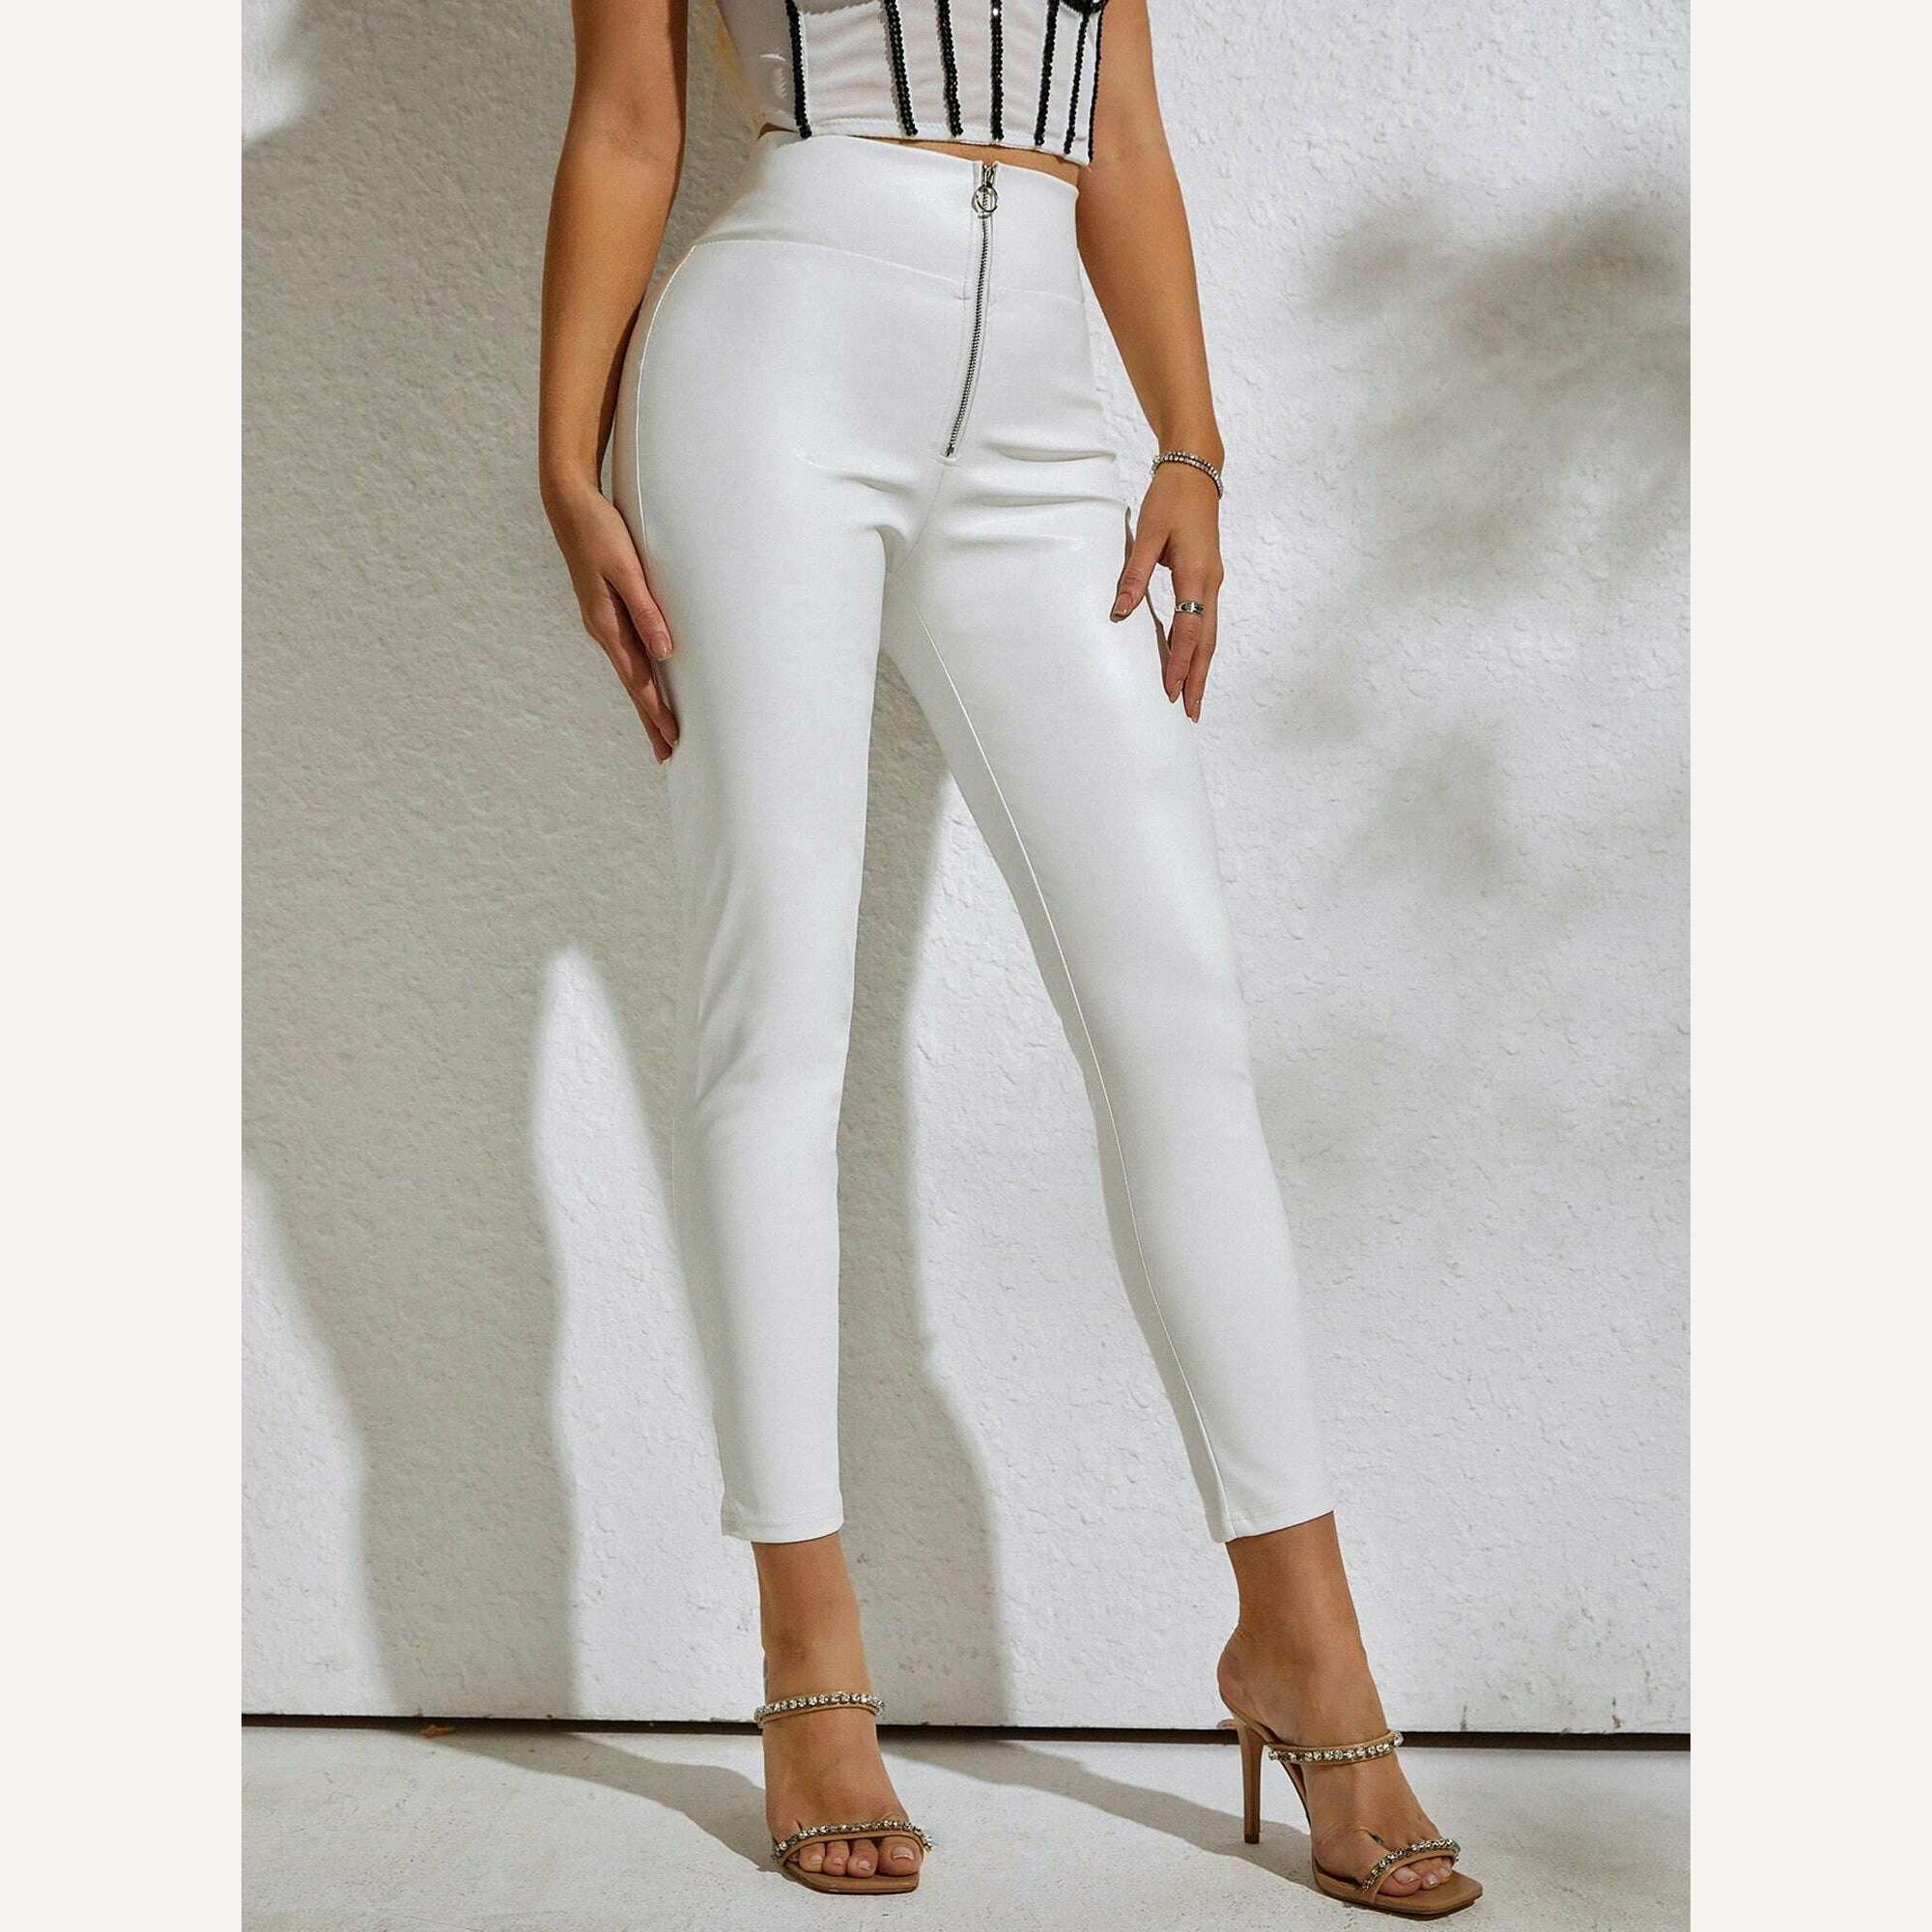 KIMLUD, Sexy High Waist Zip Front PU Leather Slim Fit Elasticity Skinny Pants, KIMLUD Womens Clothes